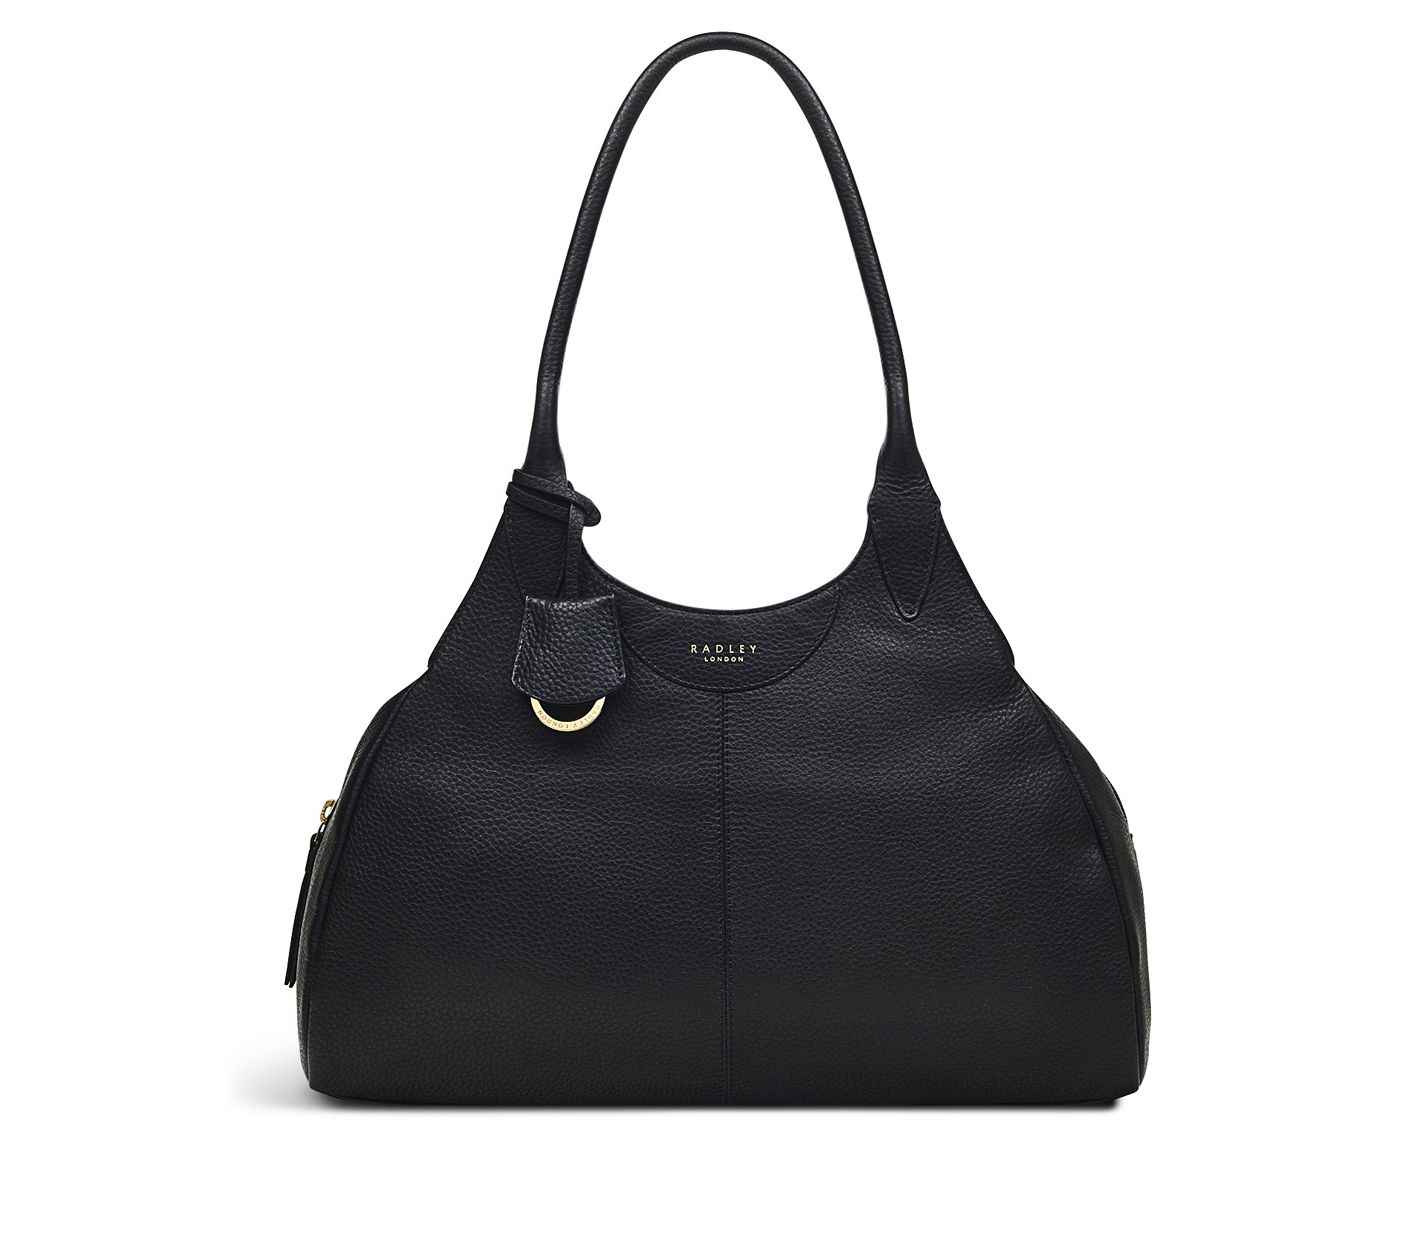 RADLEY London Leather and Suede Multiway Handbag - Baylis Road on QVC 